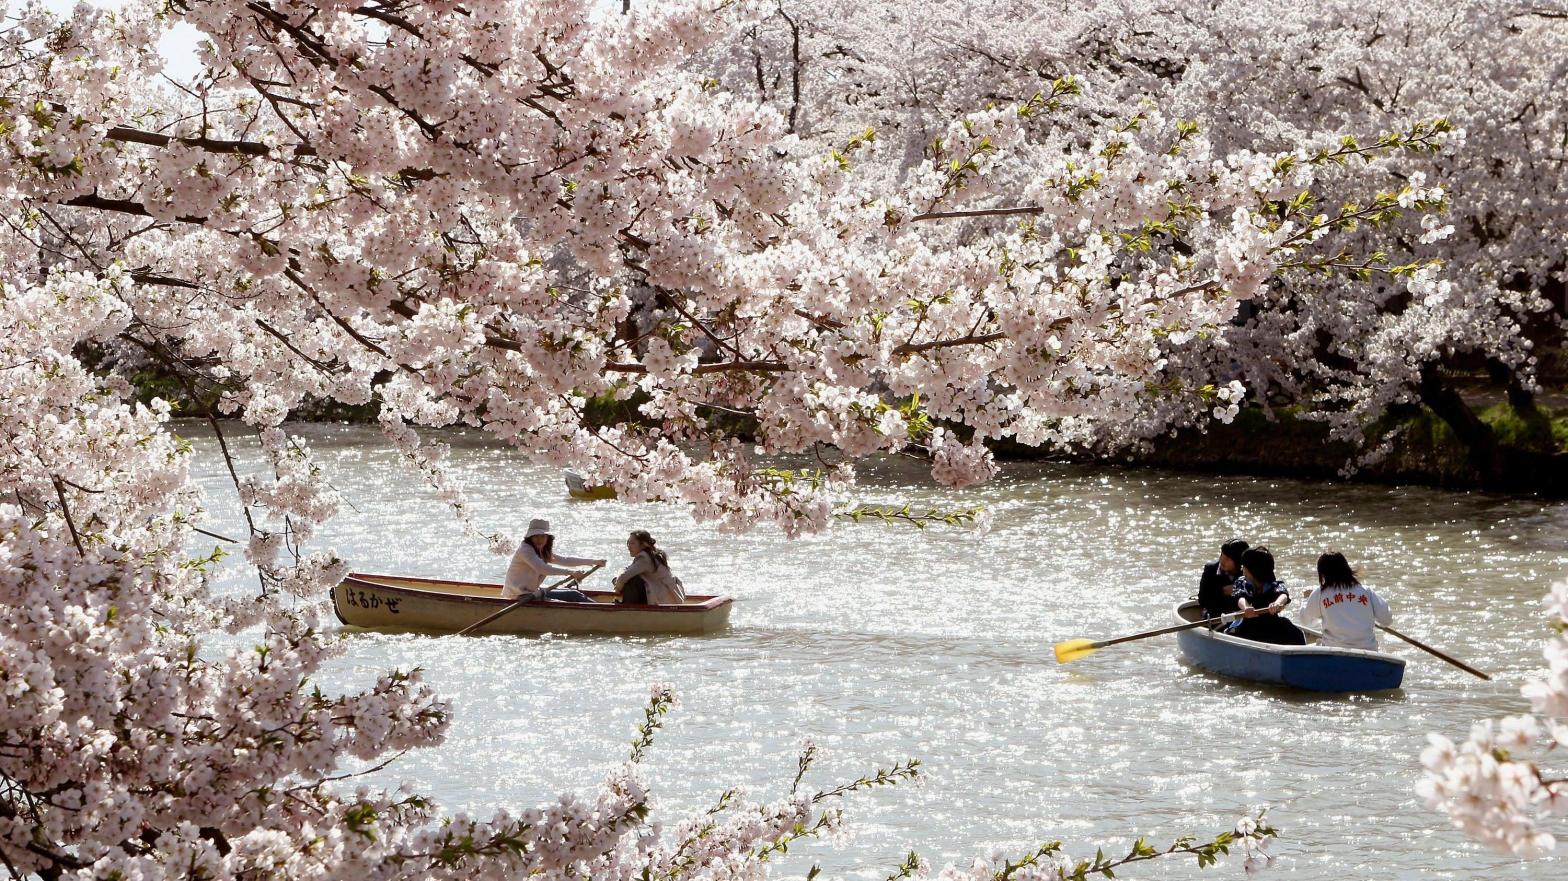 Cherry blossoms are a staple of spring in Kyoto, Japan. (Photo: Koichi Kamoshida, Getty Images)